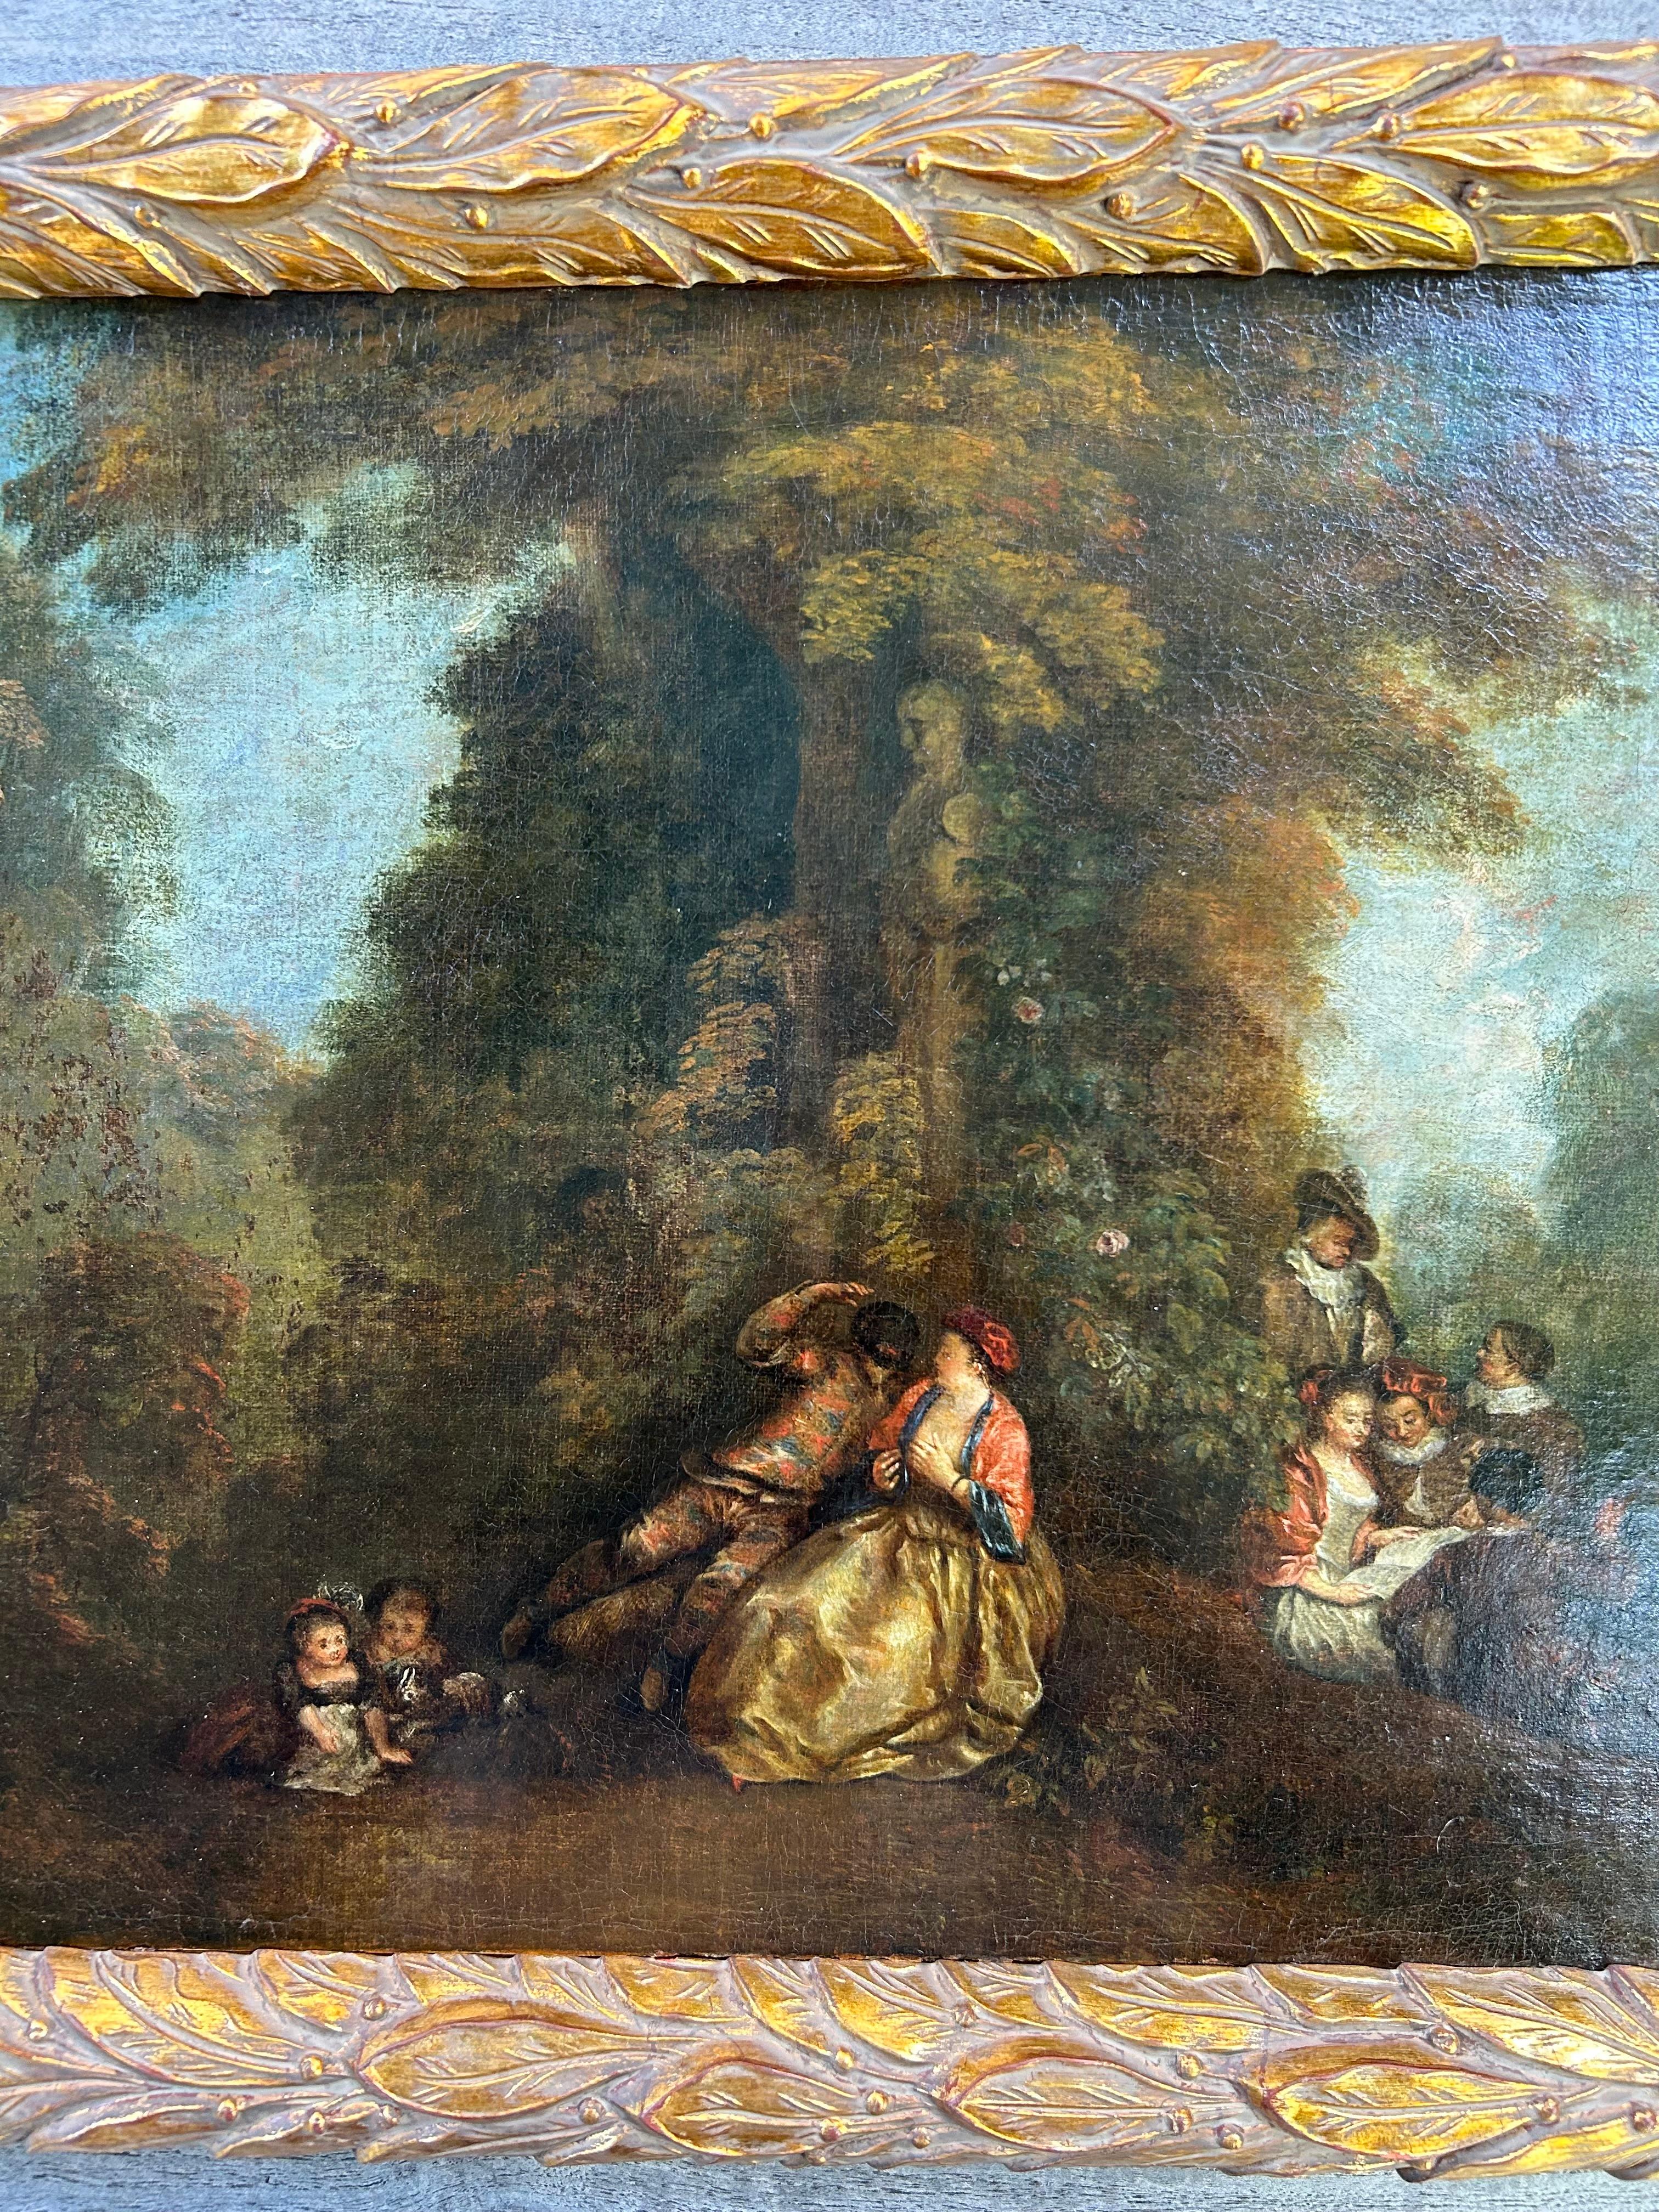 A beautiful 18th Century oil on canvas, depicting a garden scene typical of the period, or 